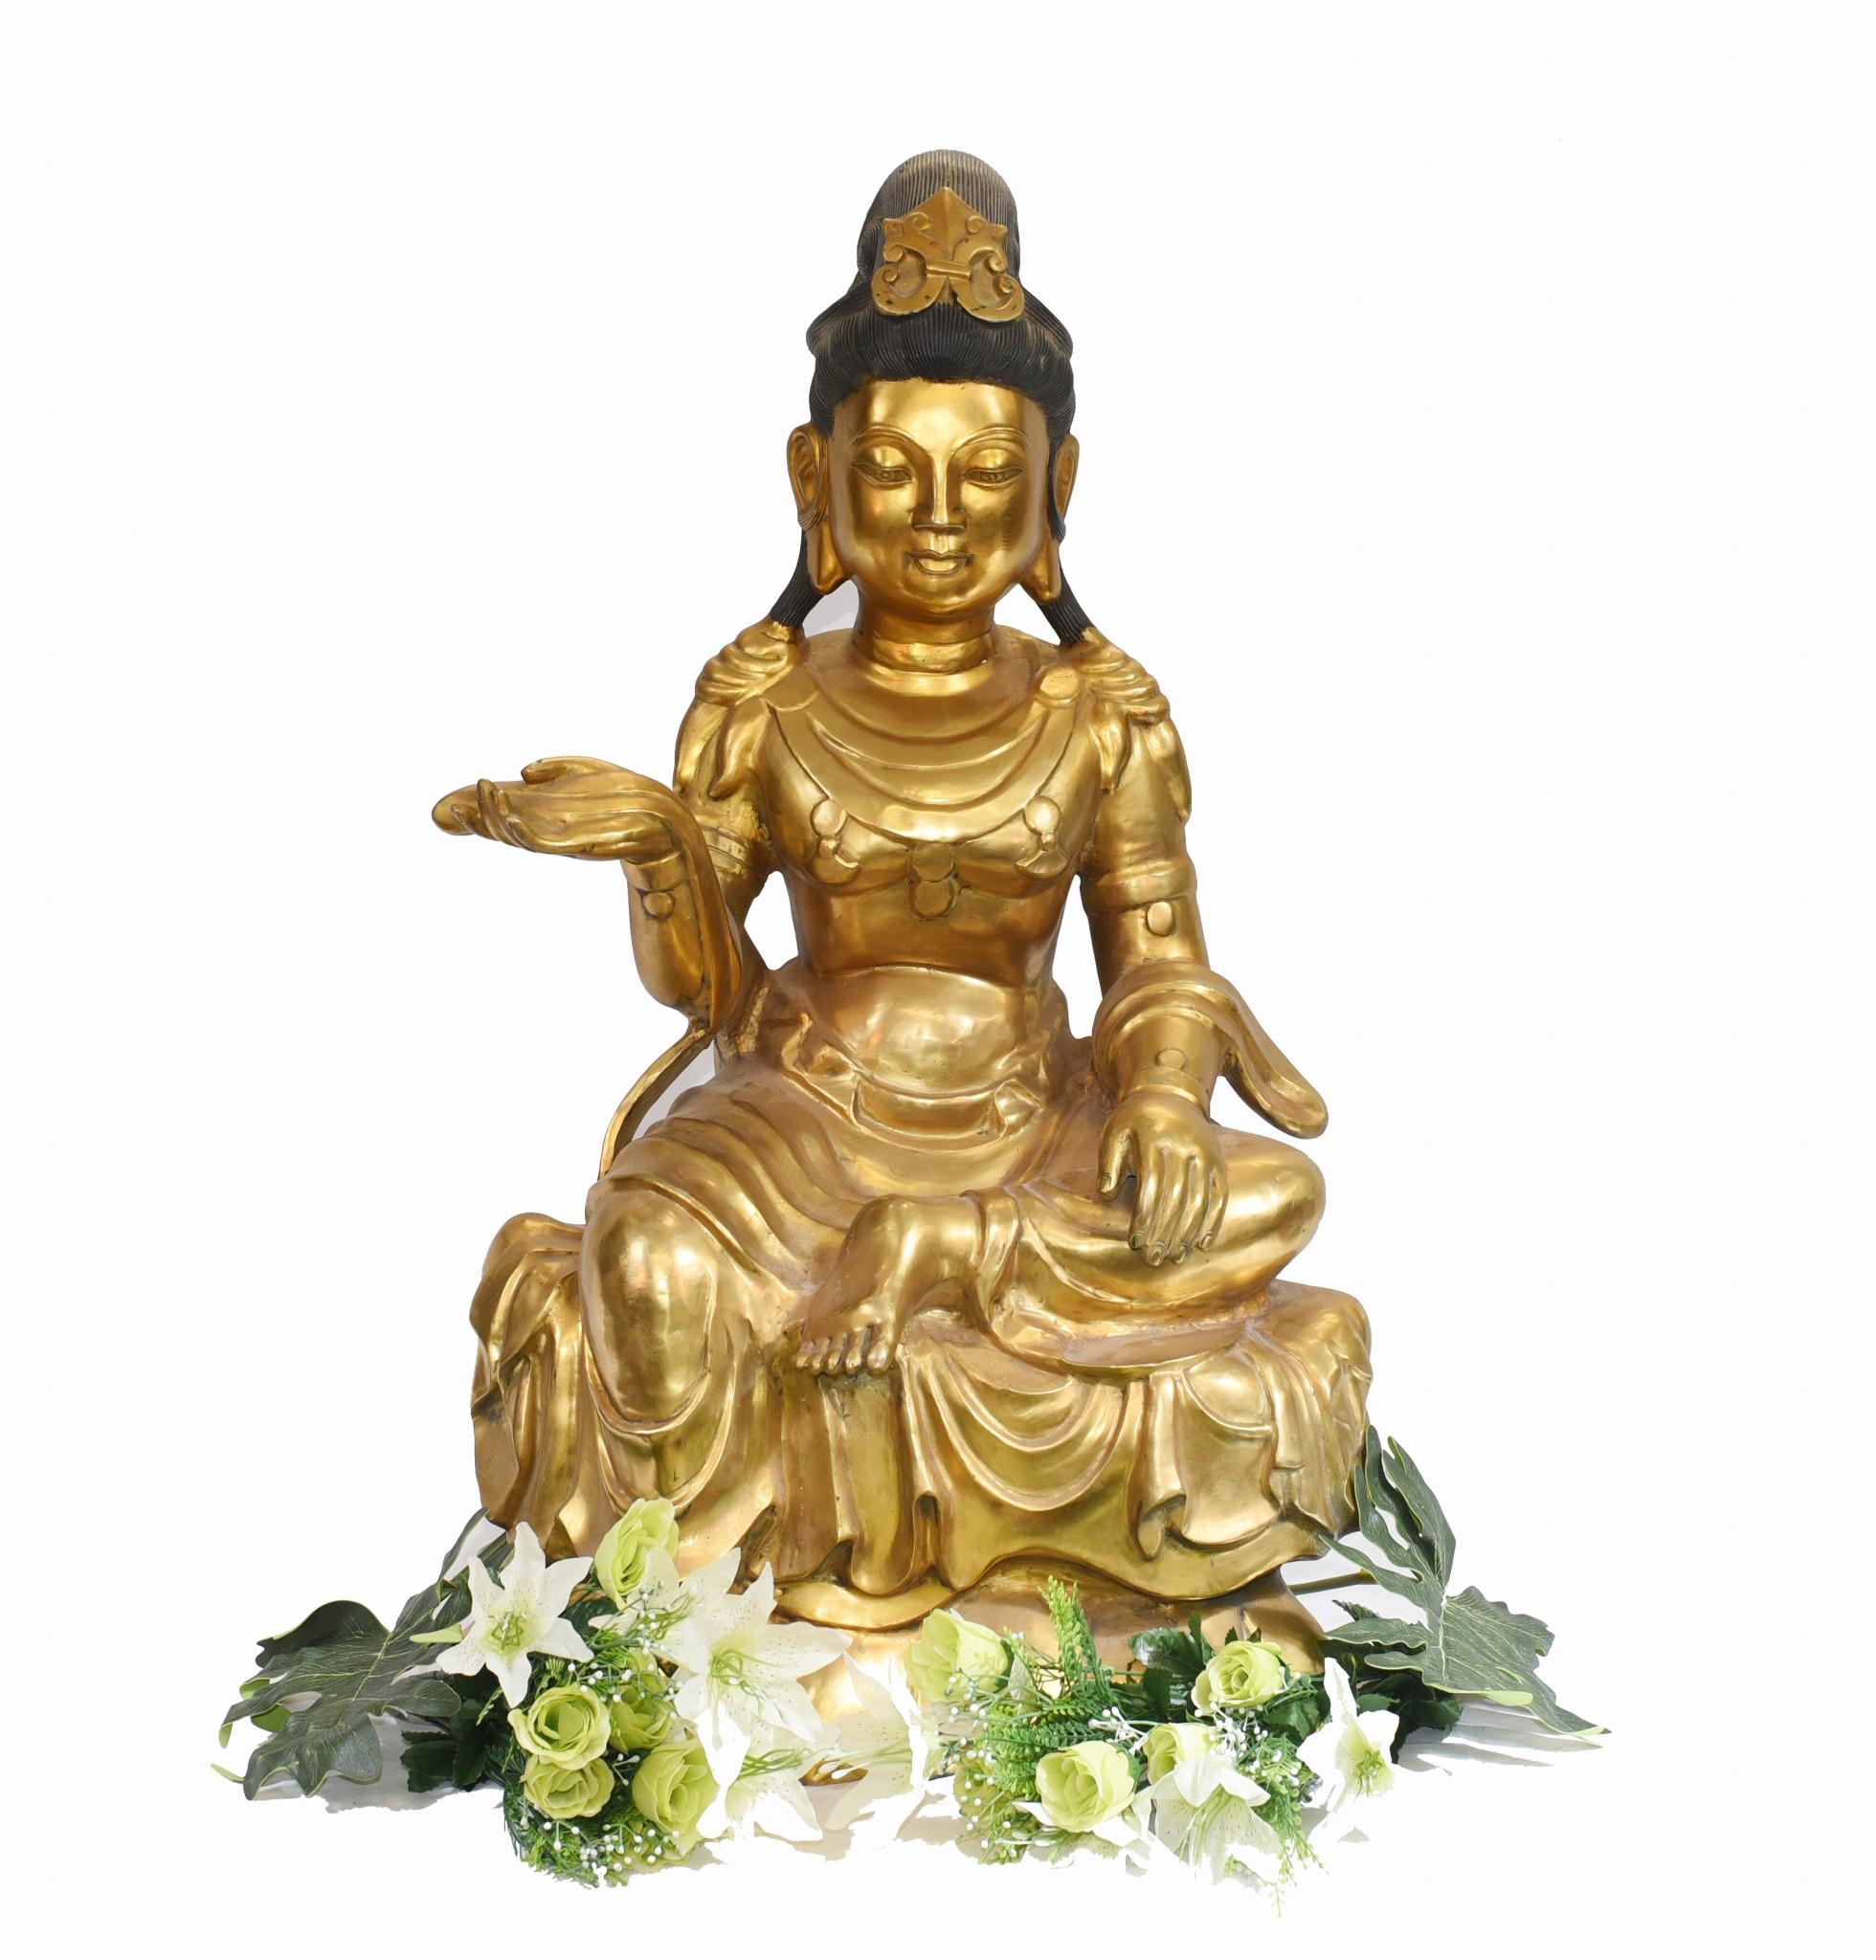 Seated Golden Buddha Statue Nepalese Meditation Bronze Sculpture In Good Condition For Sale In Potters Bar, GB